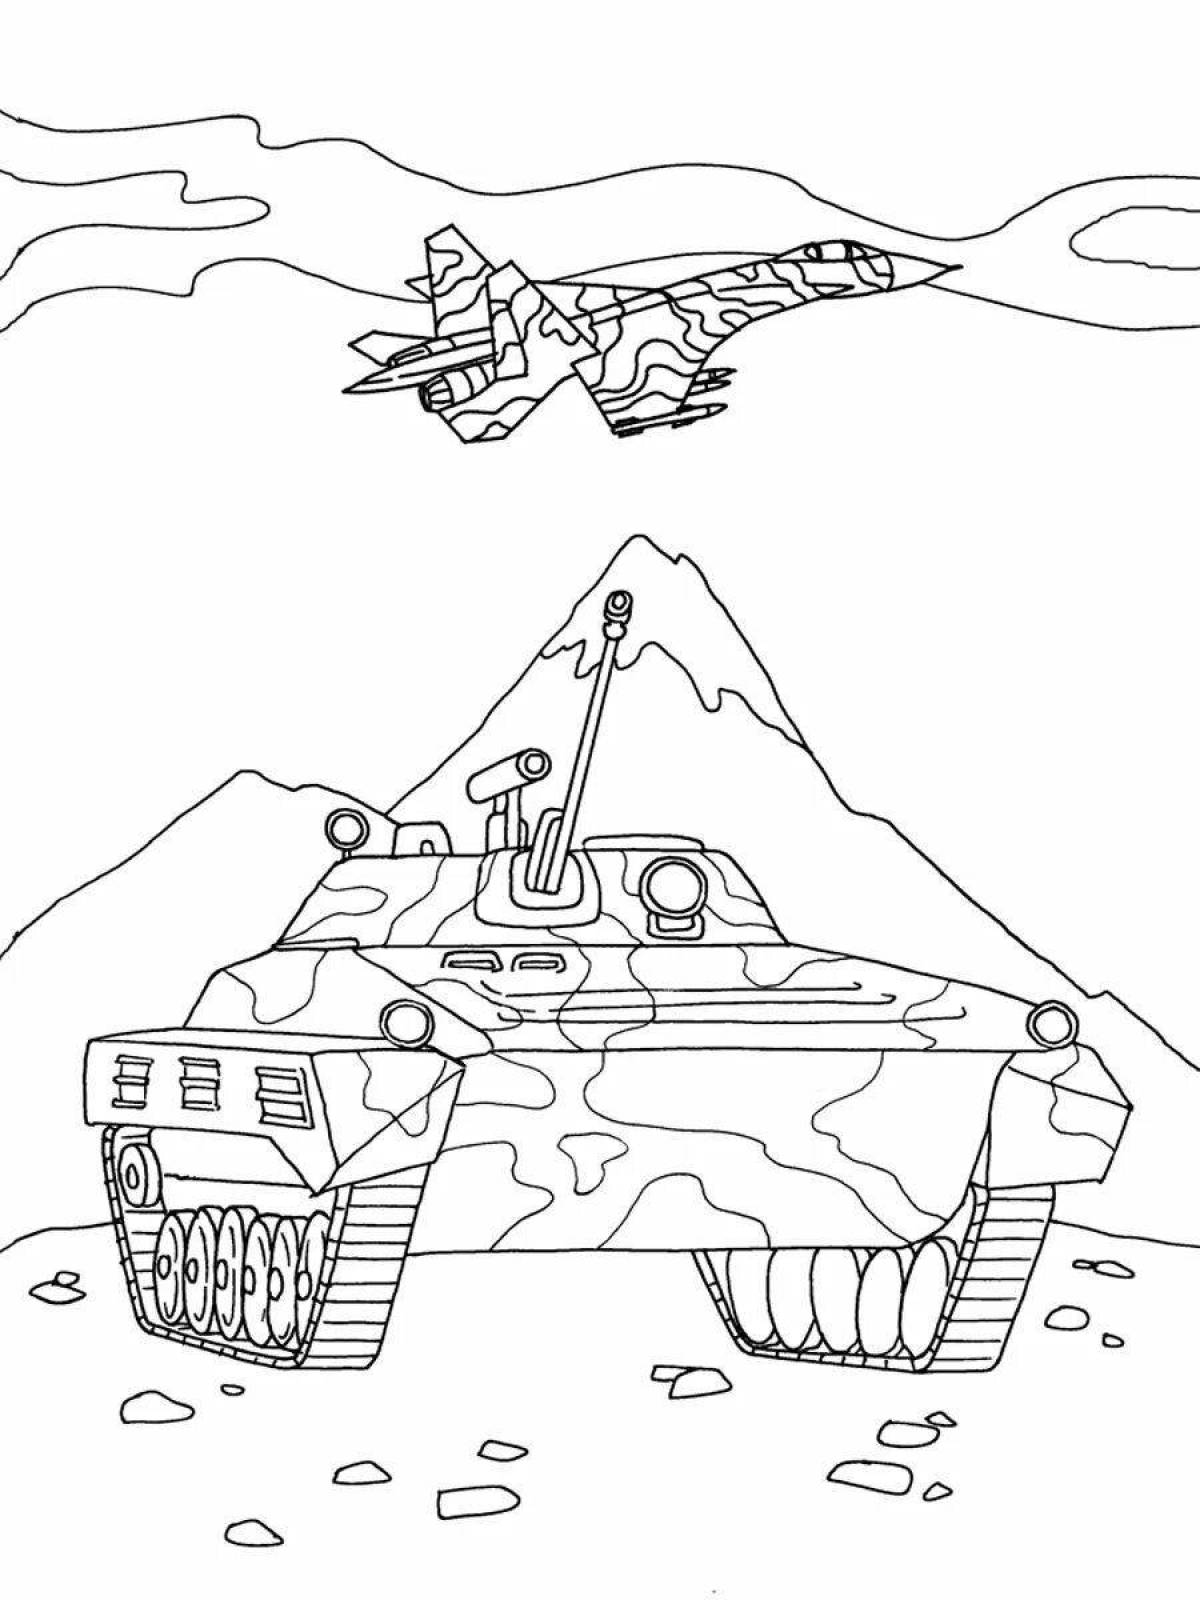 Our army is strong coloring page